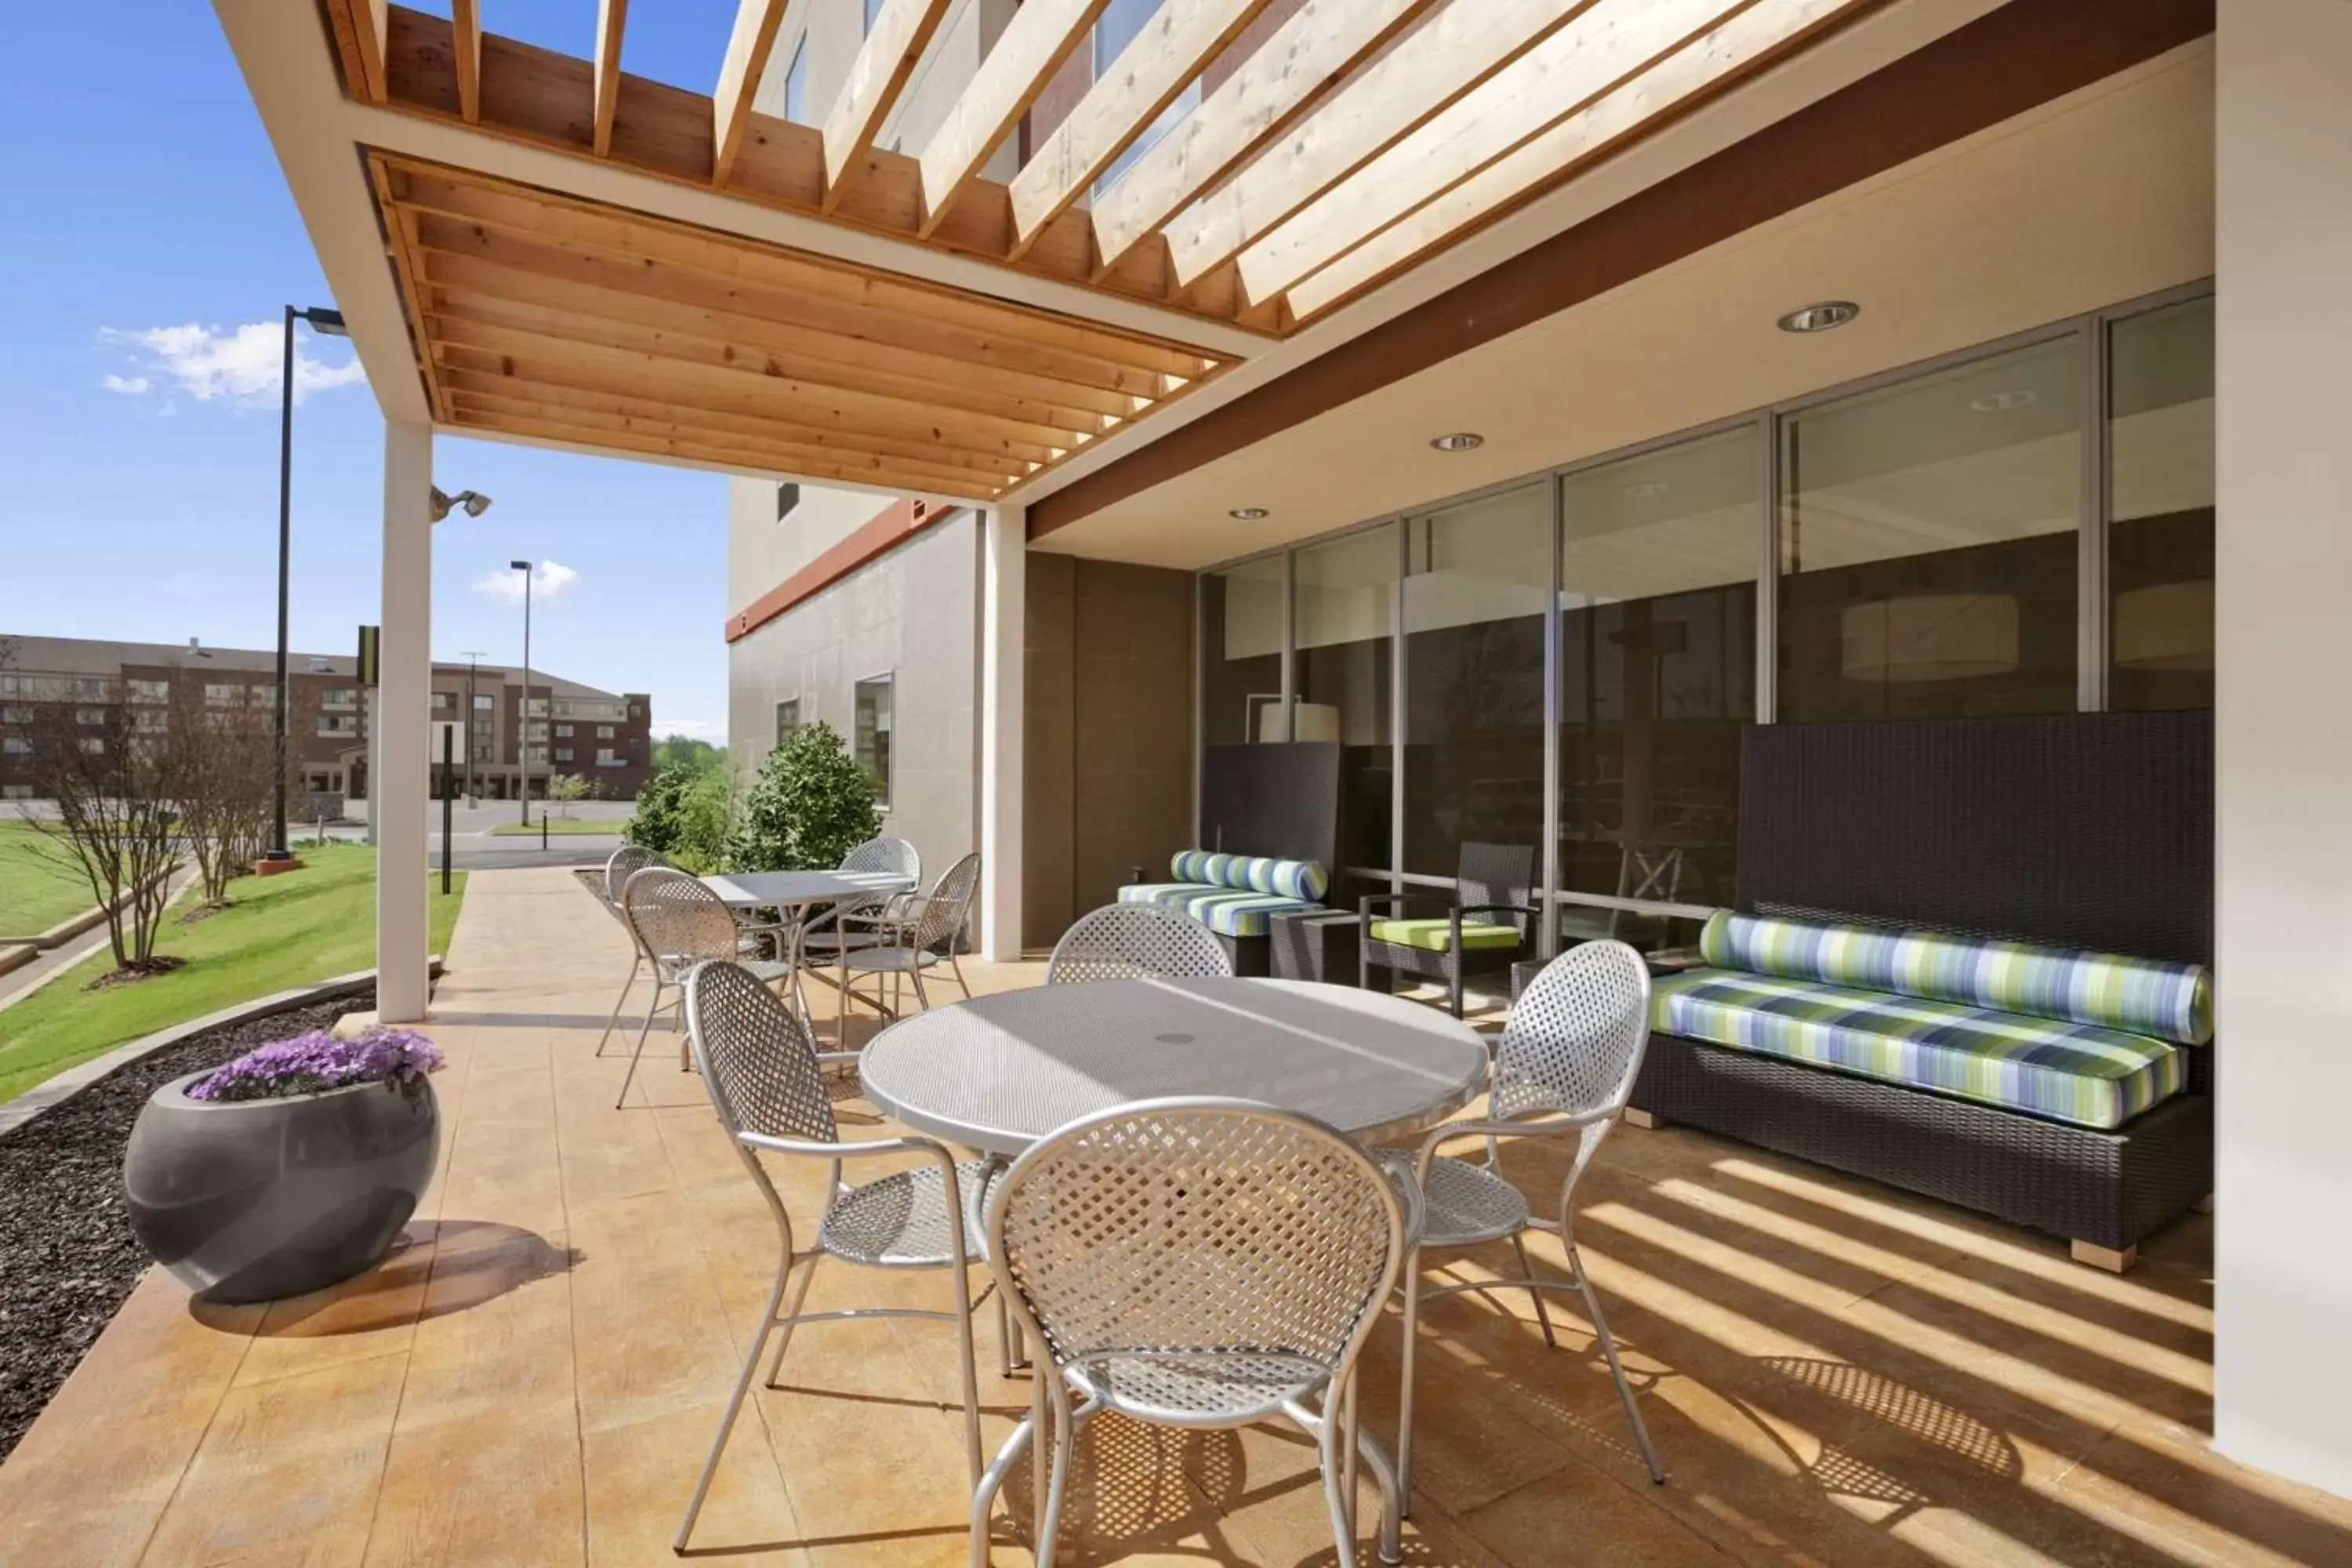 Patio in Home2 Suites by Hilton - Oxford